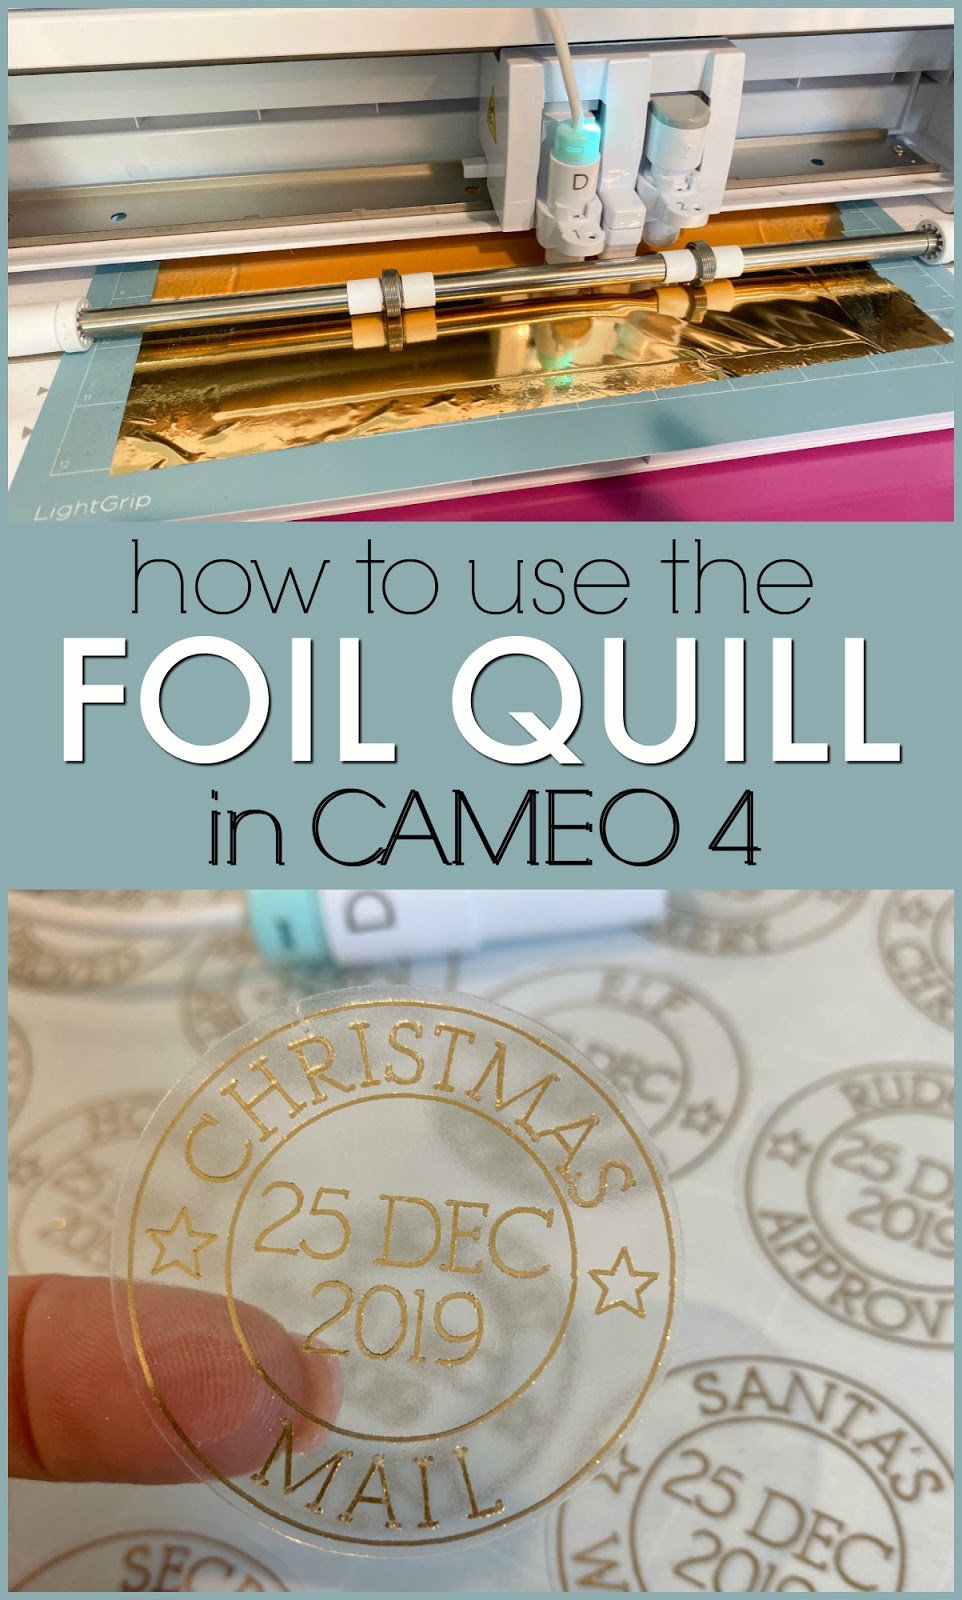 Aluminum Foil 101 - How Foil is Made, Uses, and More!